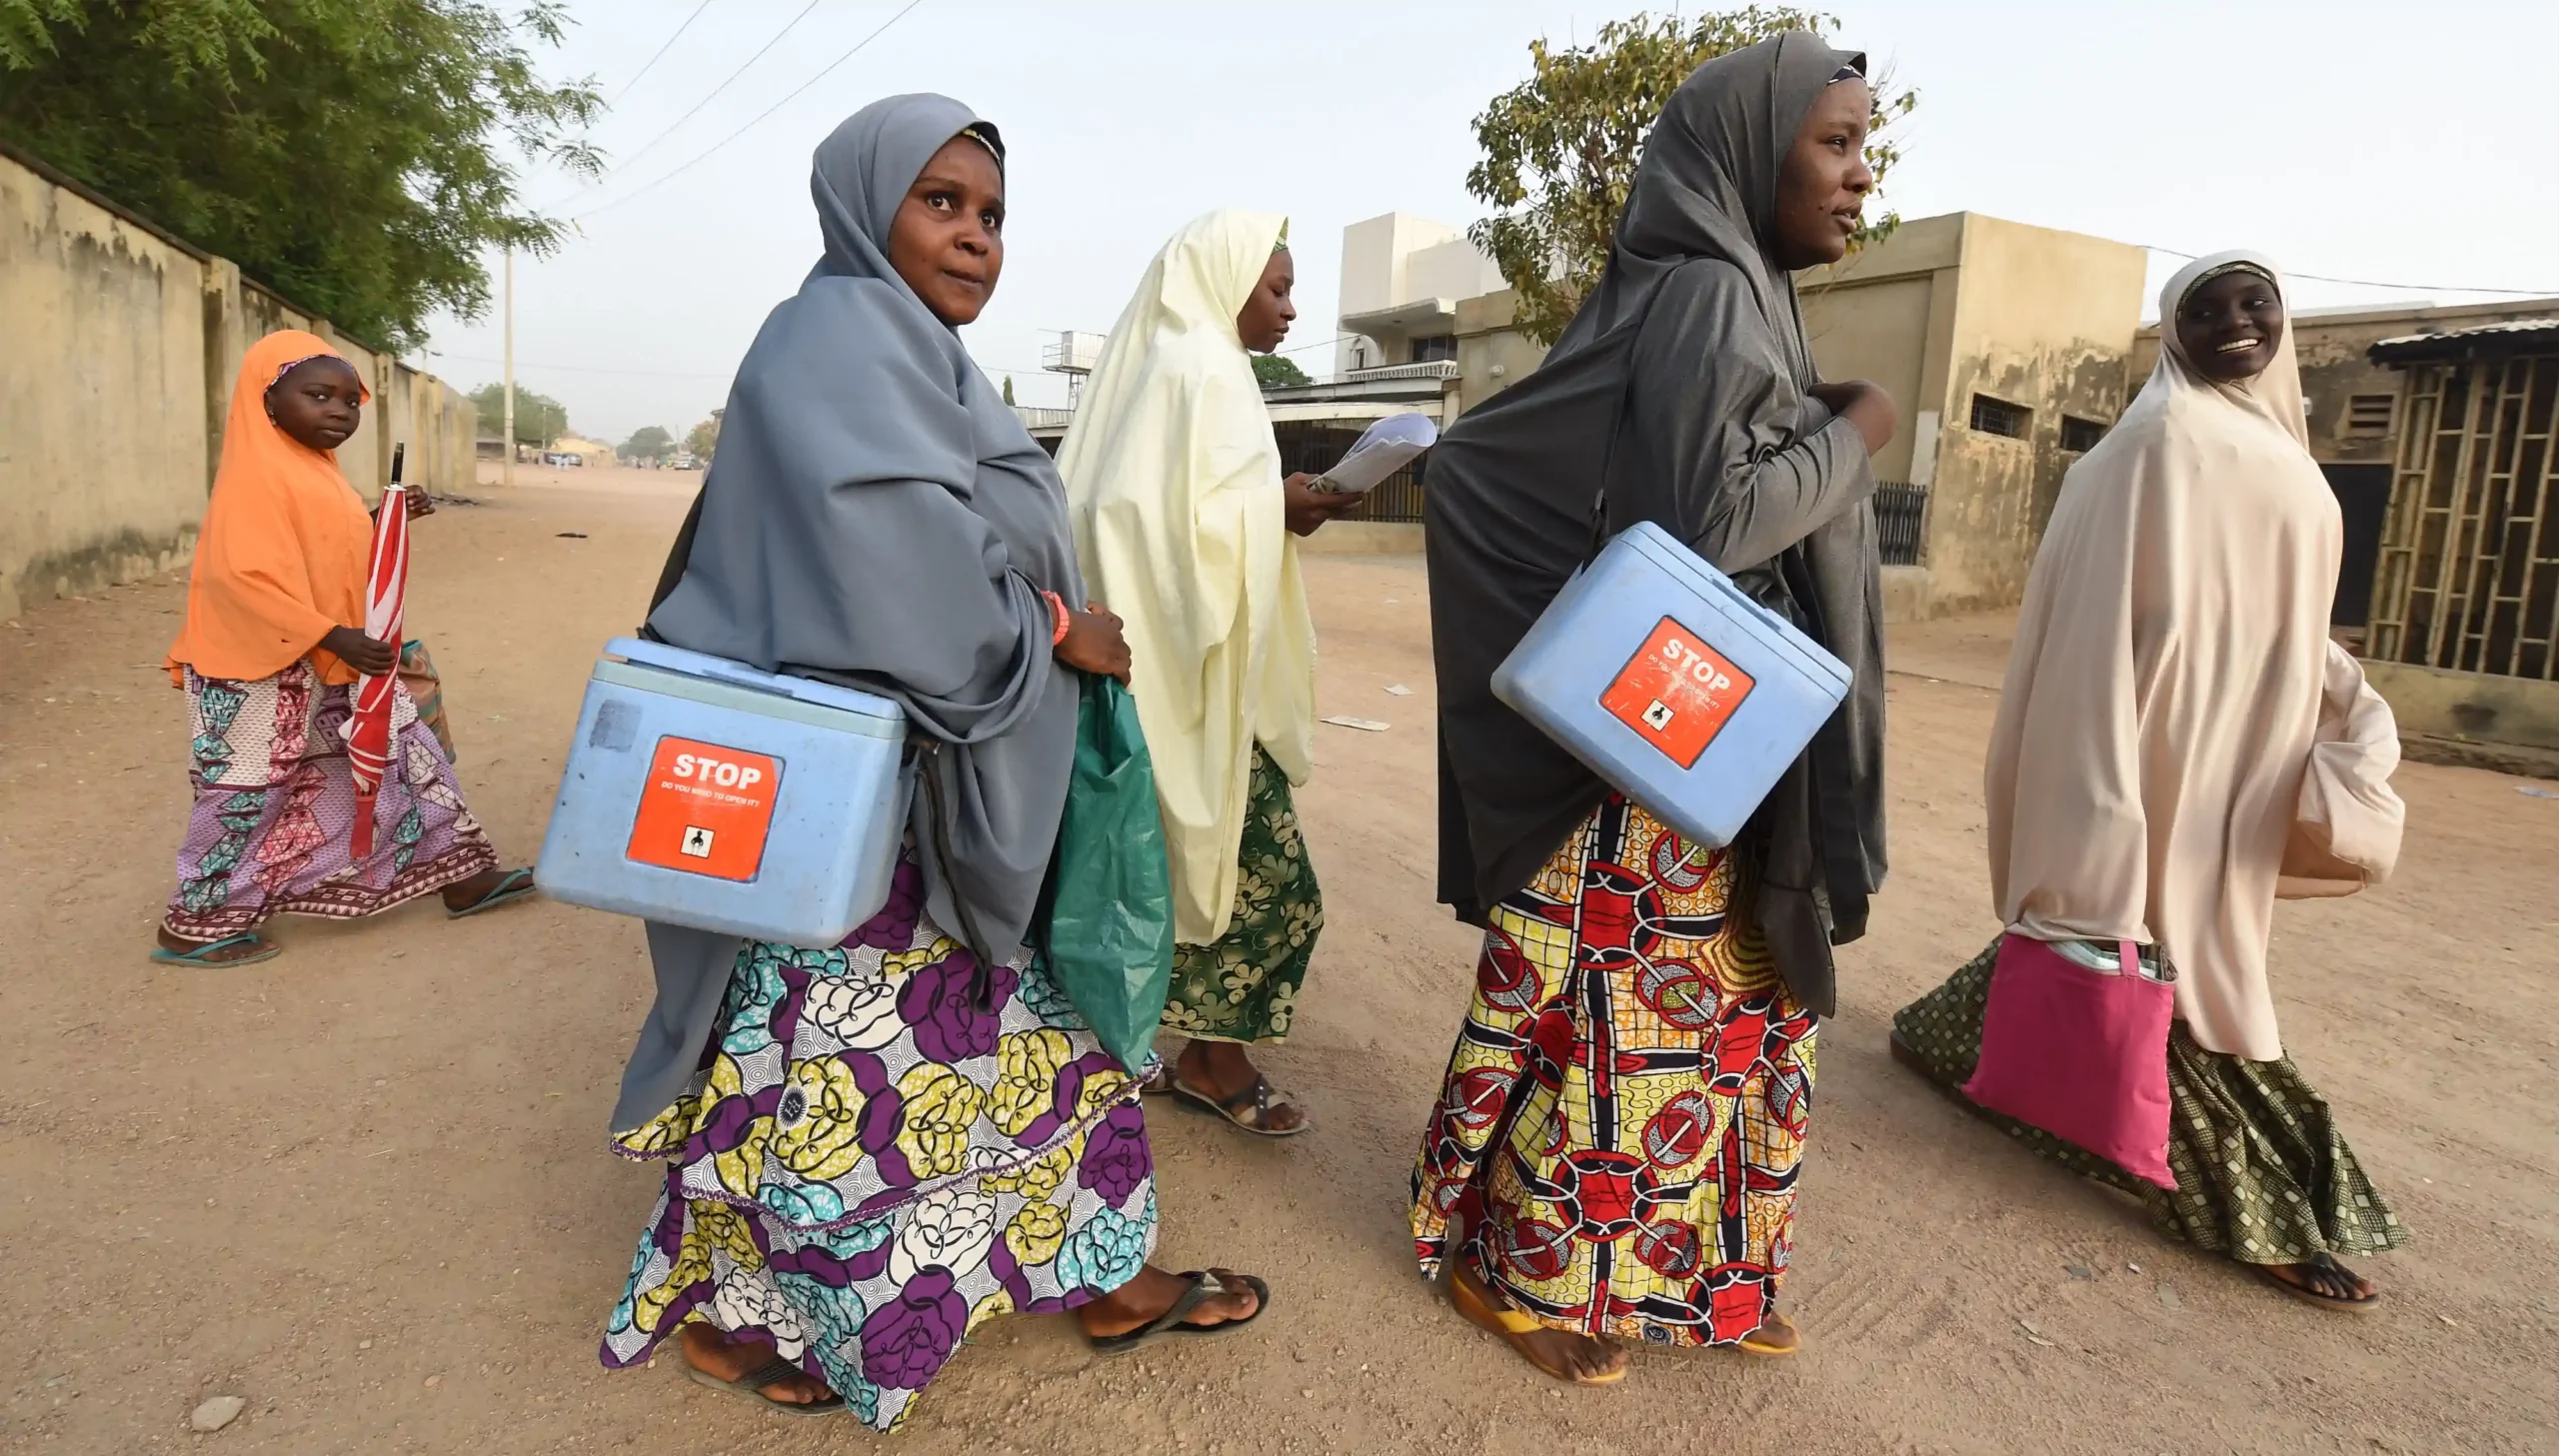 Health workers going door-to-door during a child immunization campaign against polio in Nigeria